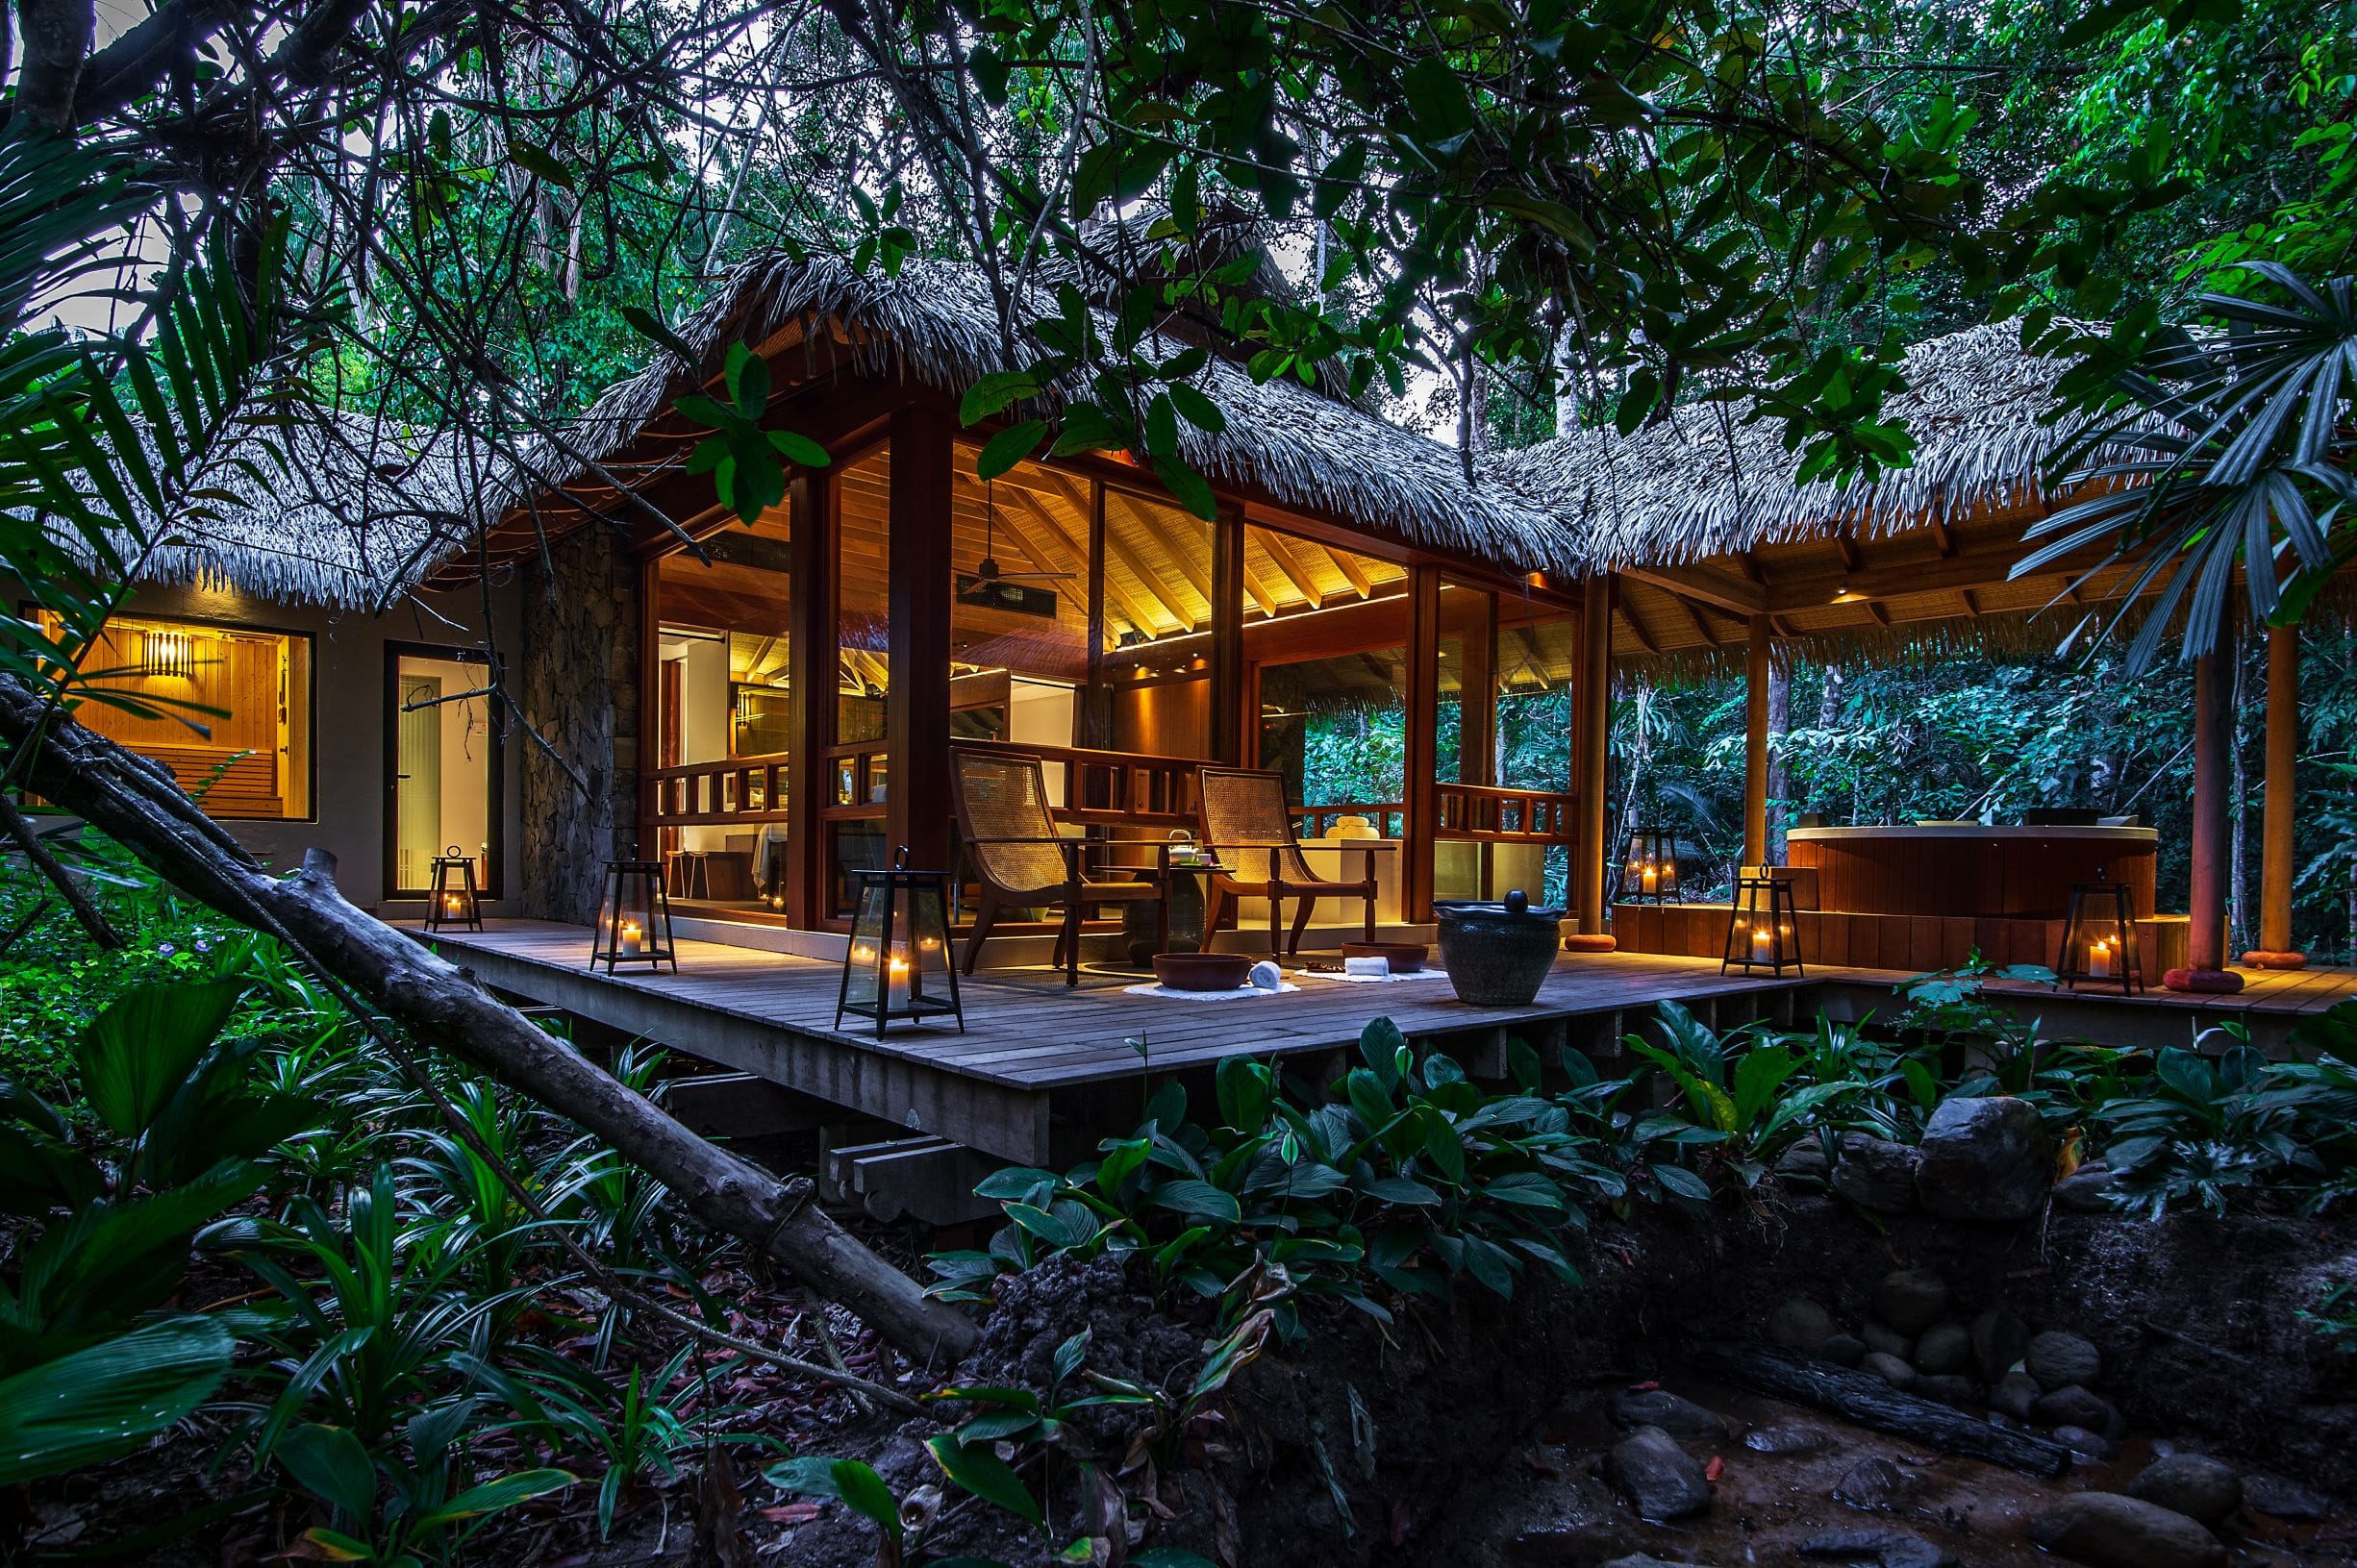 The Datai Langkawi a best jungle resort in the world